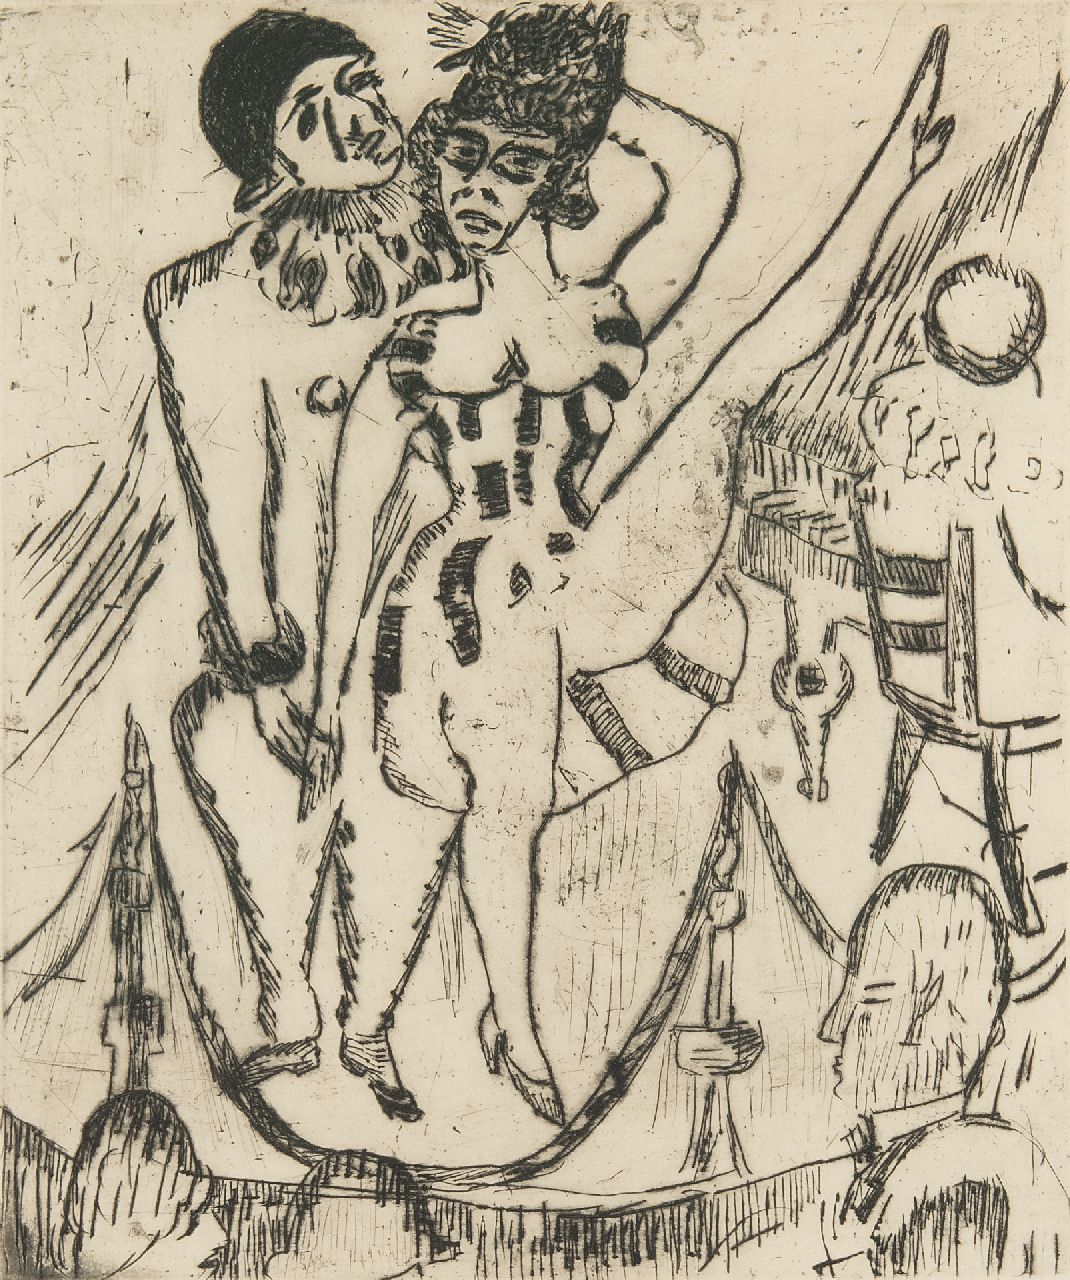 Wiegers J.  | Jan Wiegers, Variety show, etching 26.0 x 21.8 cm, signed l.r. (in pencil) and dated '24 (in pencil)